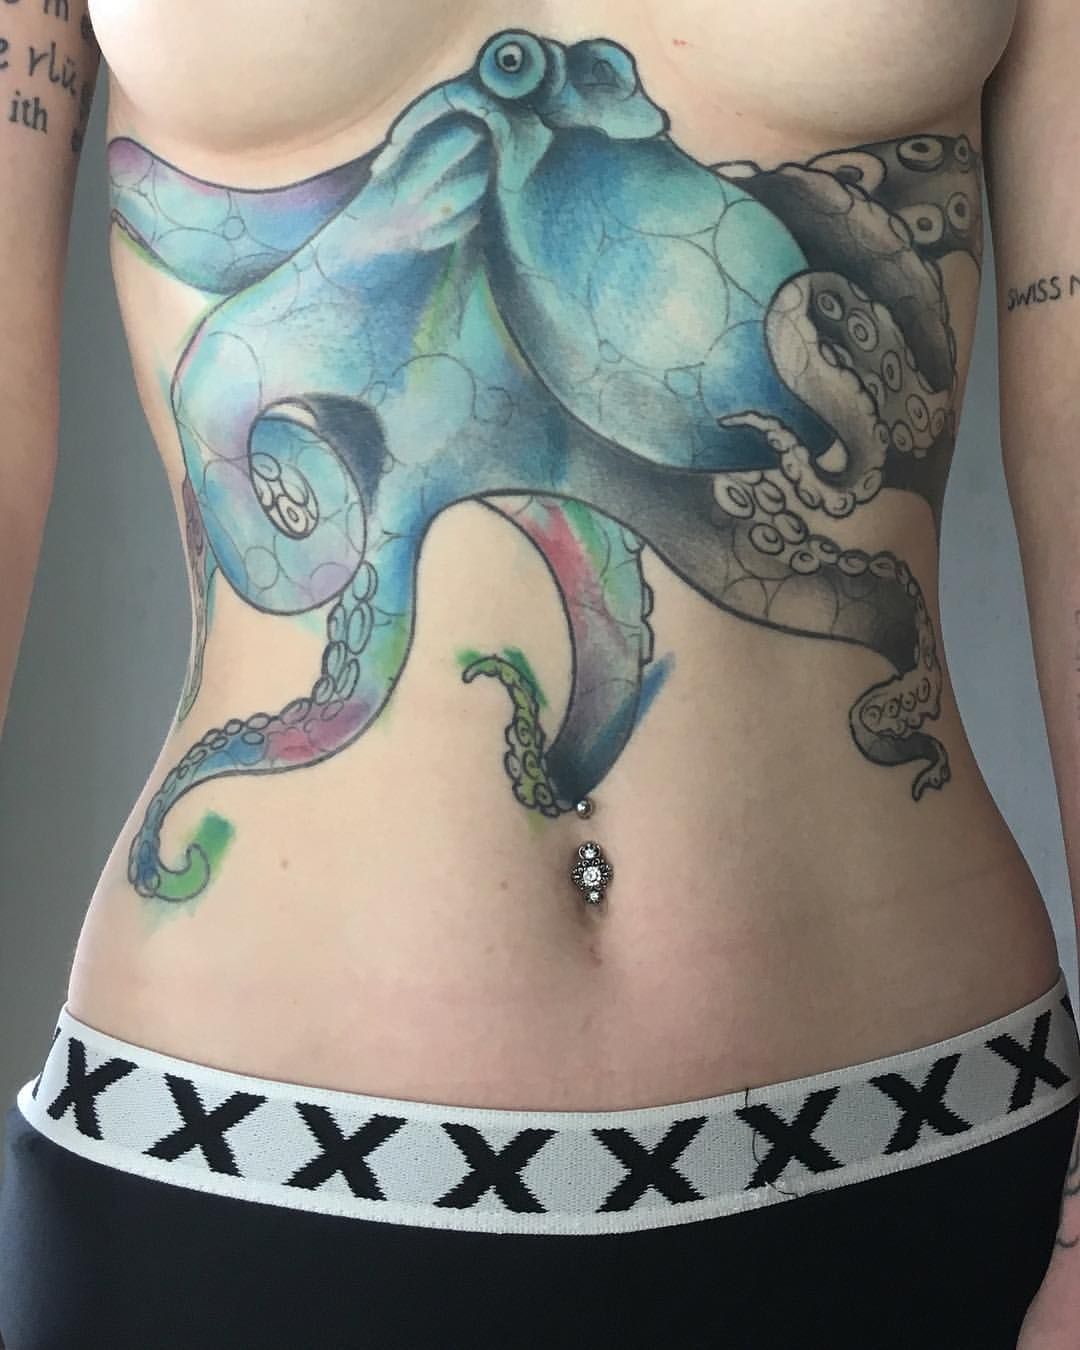 caroline plowman recommends girl with the octopus tattoo pic